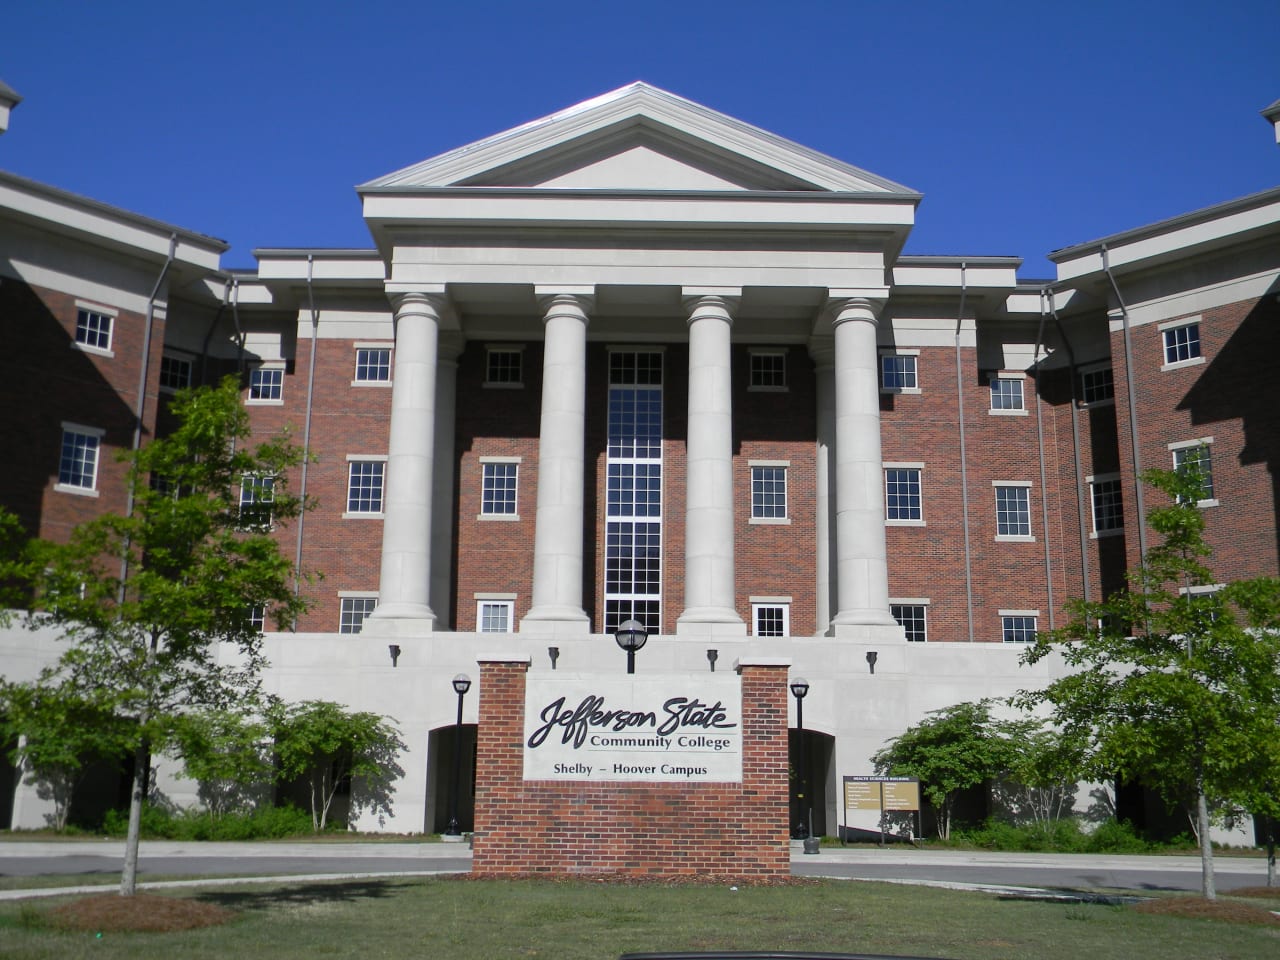 Jefferson State Community College Associate of Science in Business